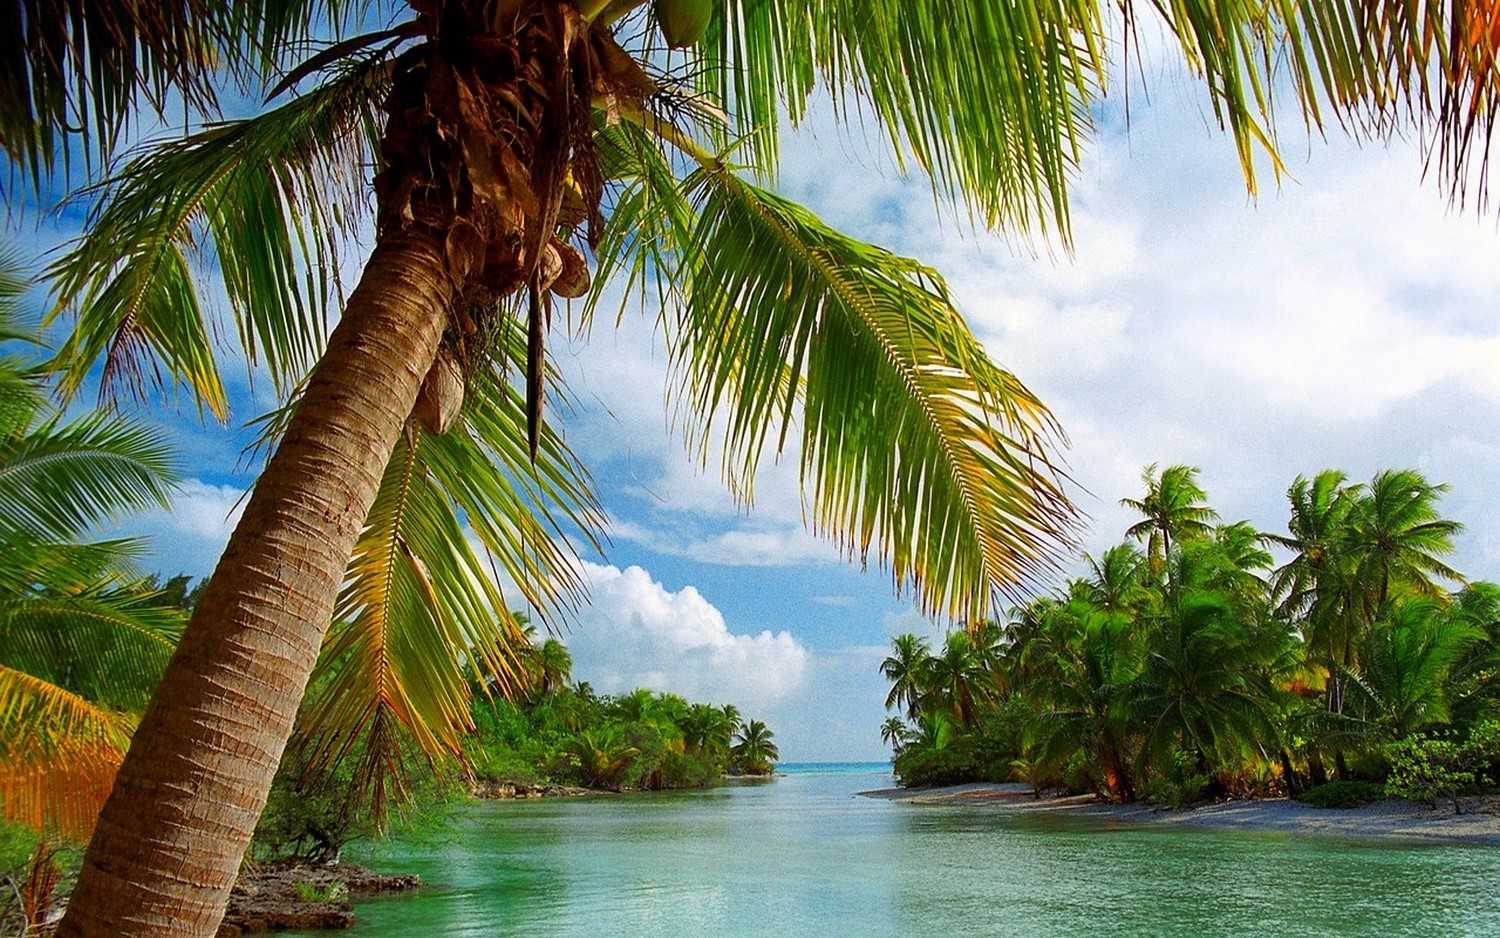 beach, Tropical, Summer, Sea, Nature, Island, Palm Trees, Landscape, Clouds, French Polynesia, Vacations Wallpaper HD / Desktop and Mobile Background